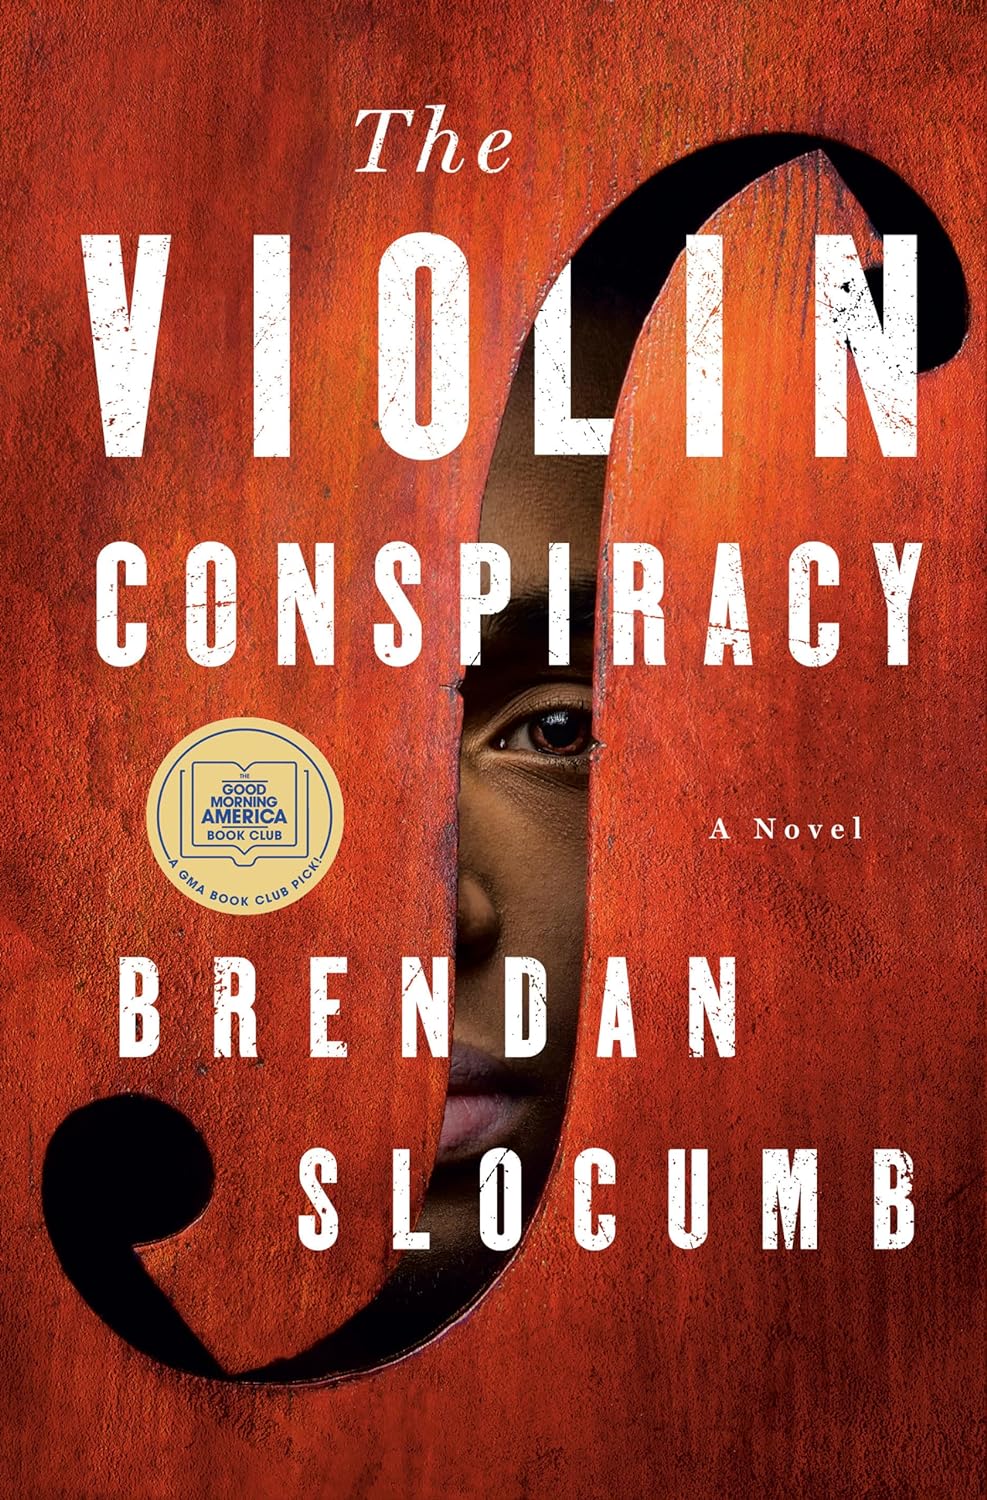 photo of the book cover "The Violin Conspiracy" by Brendan Slocumb